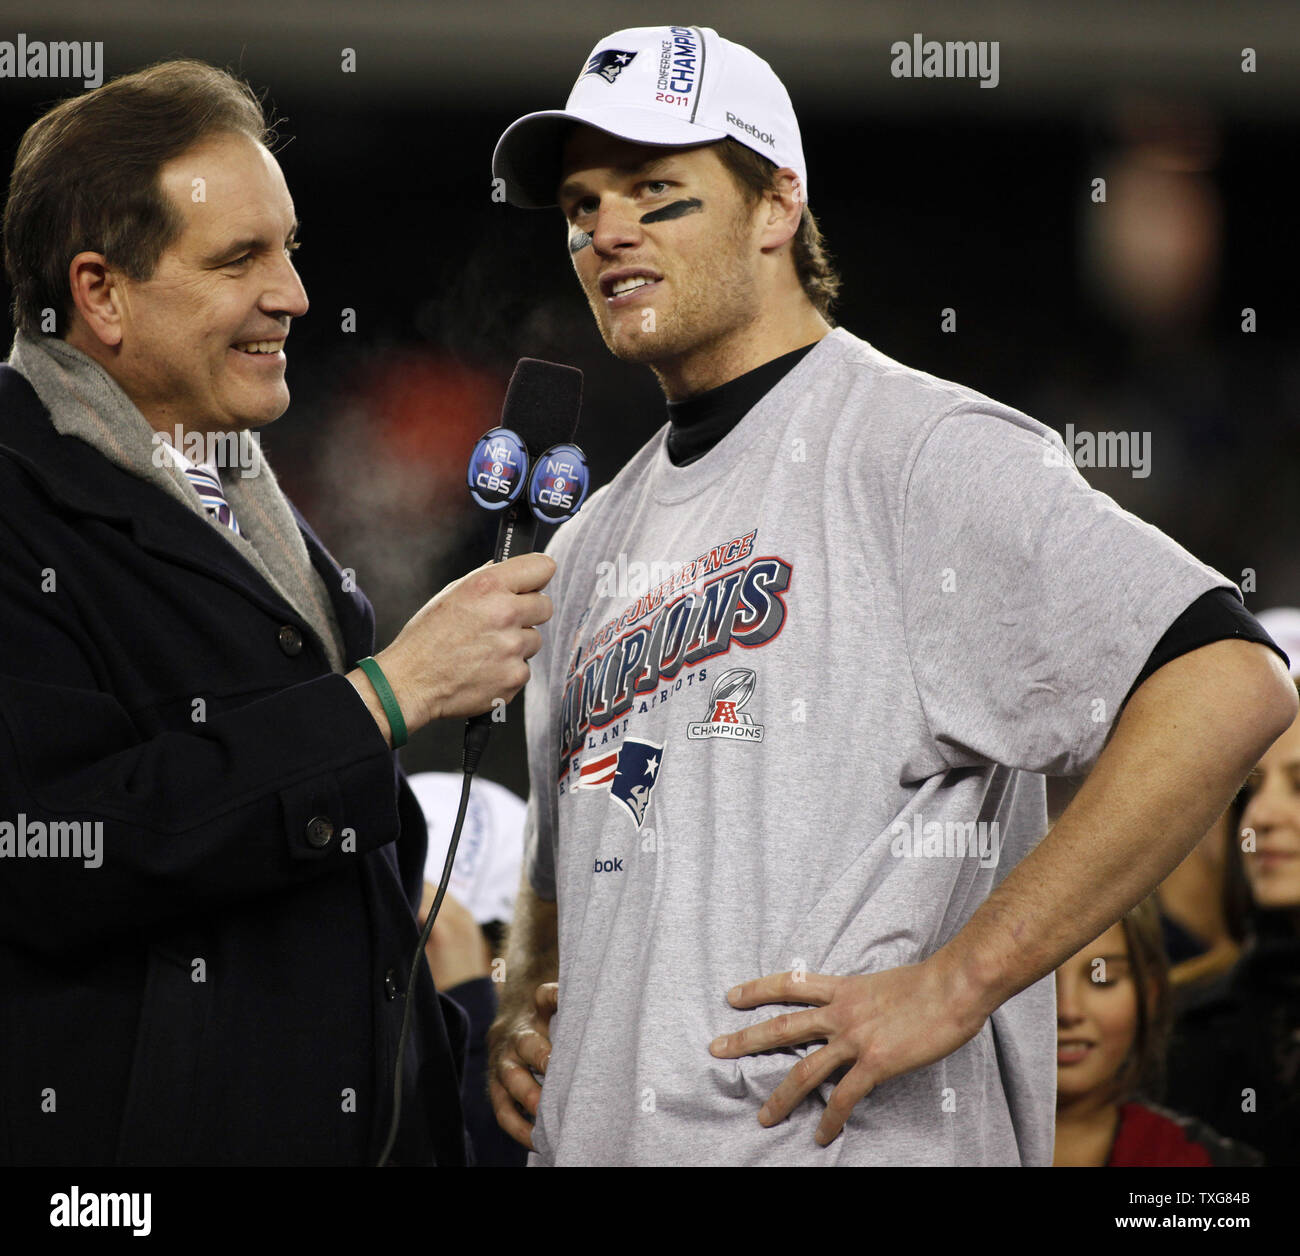 New England Patriots quarterback Tom Brady (R) chats with Jim Nantz after the Patriots defeated the Ravens in the AFC Championship game at Gillette Stadium in Foxboro, Massachusetts on January 22, 2012.   UPI/Matthew Healey Stock Photo